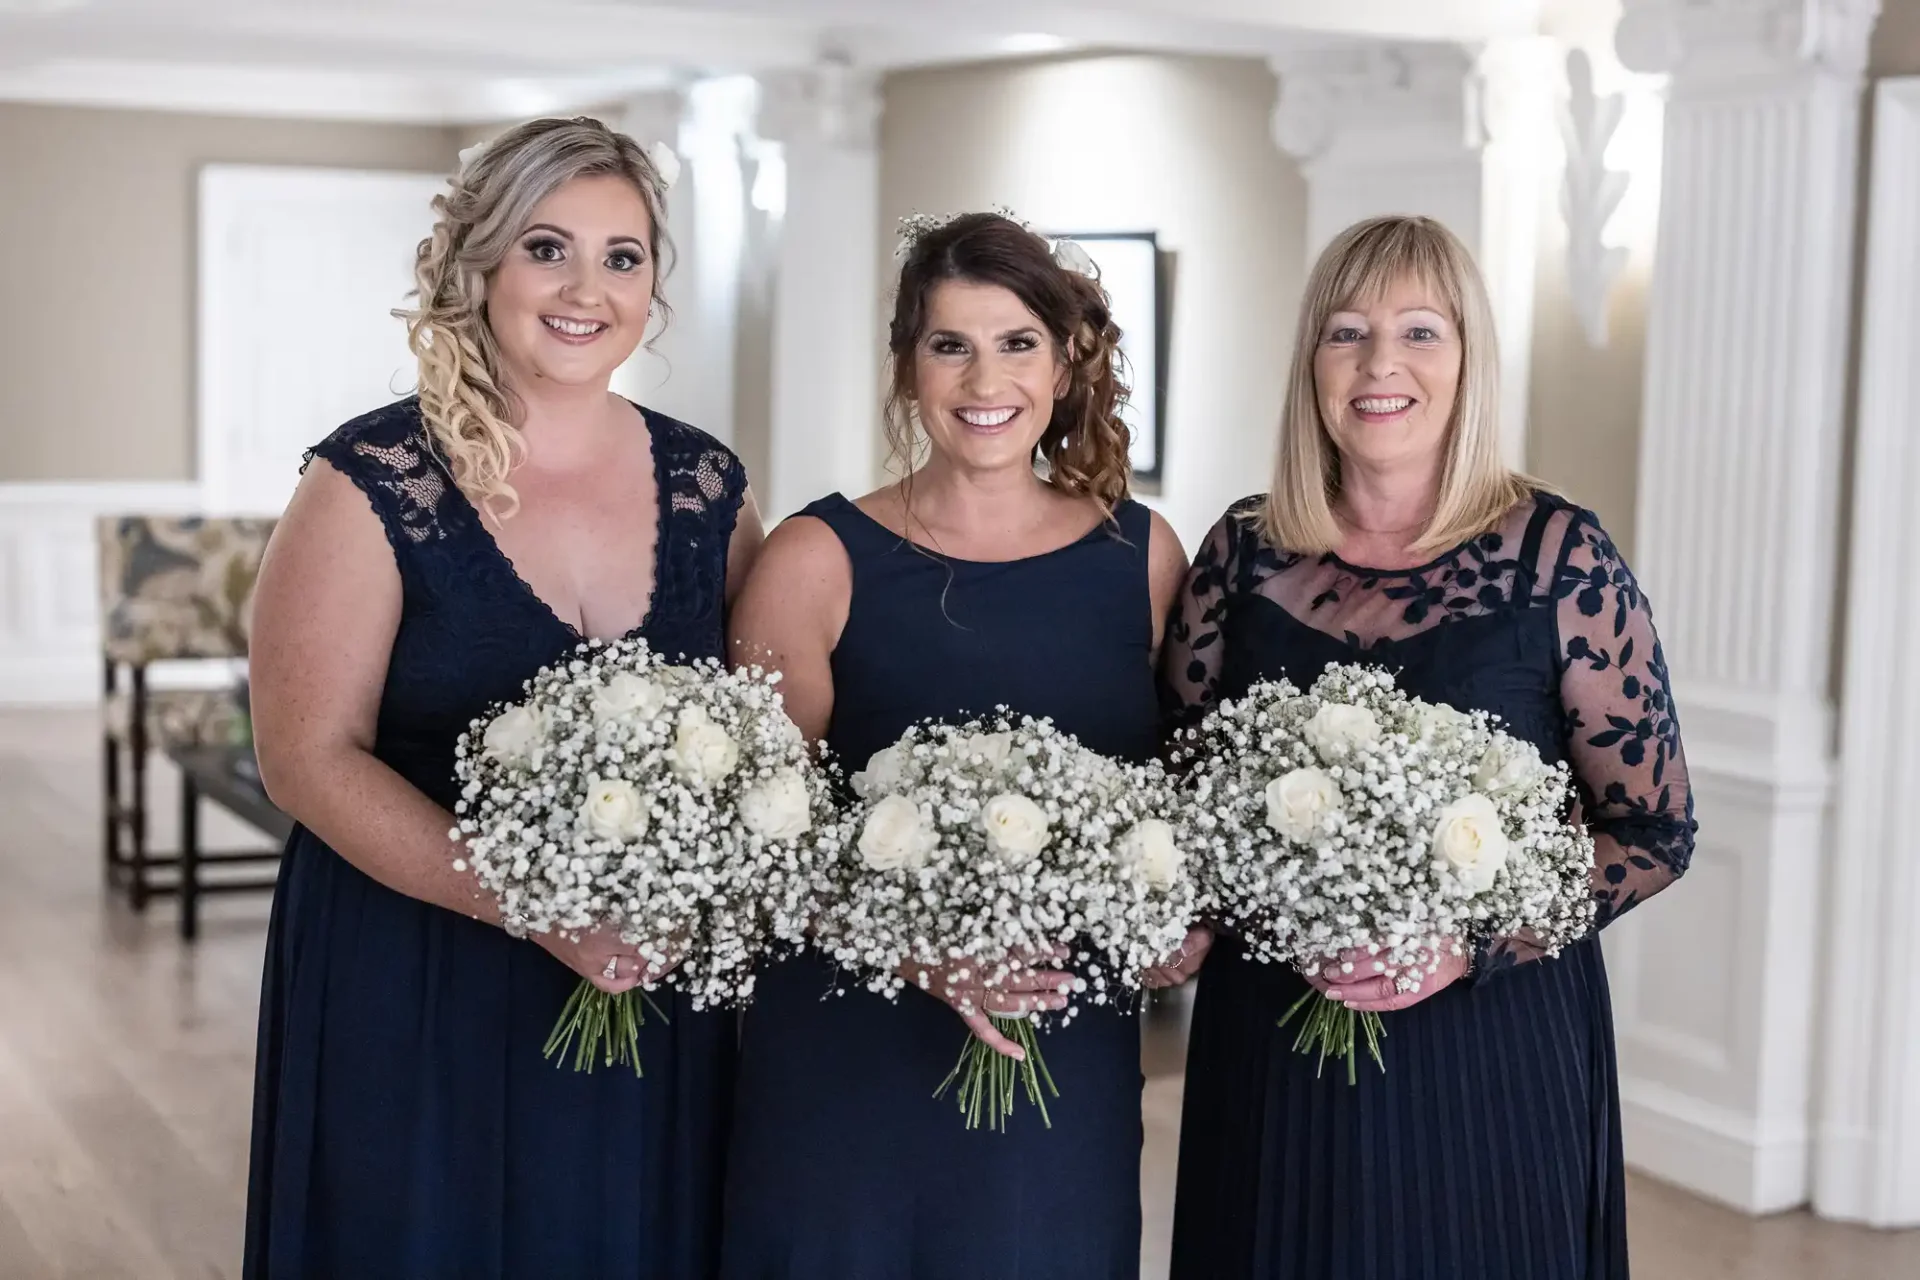 Three women in dark blue dresses holding large bouquets of white flowers, smiling in an elegant room with white columns.